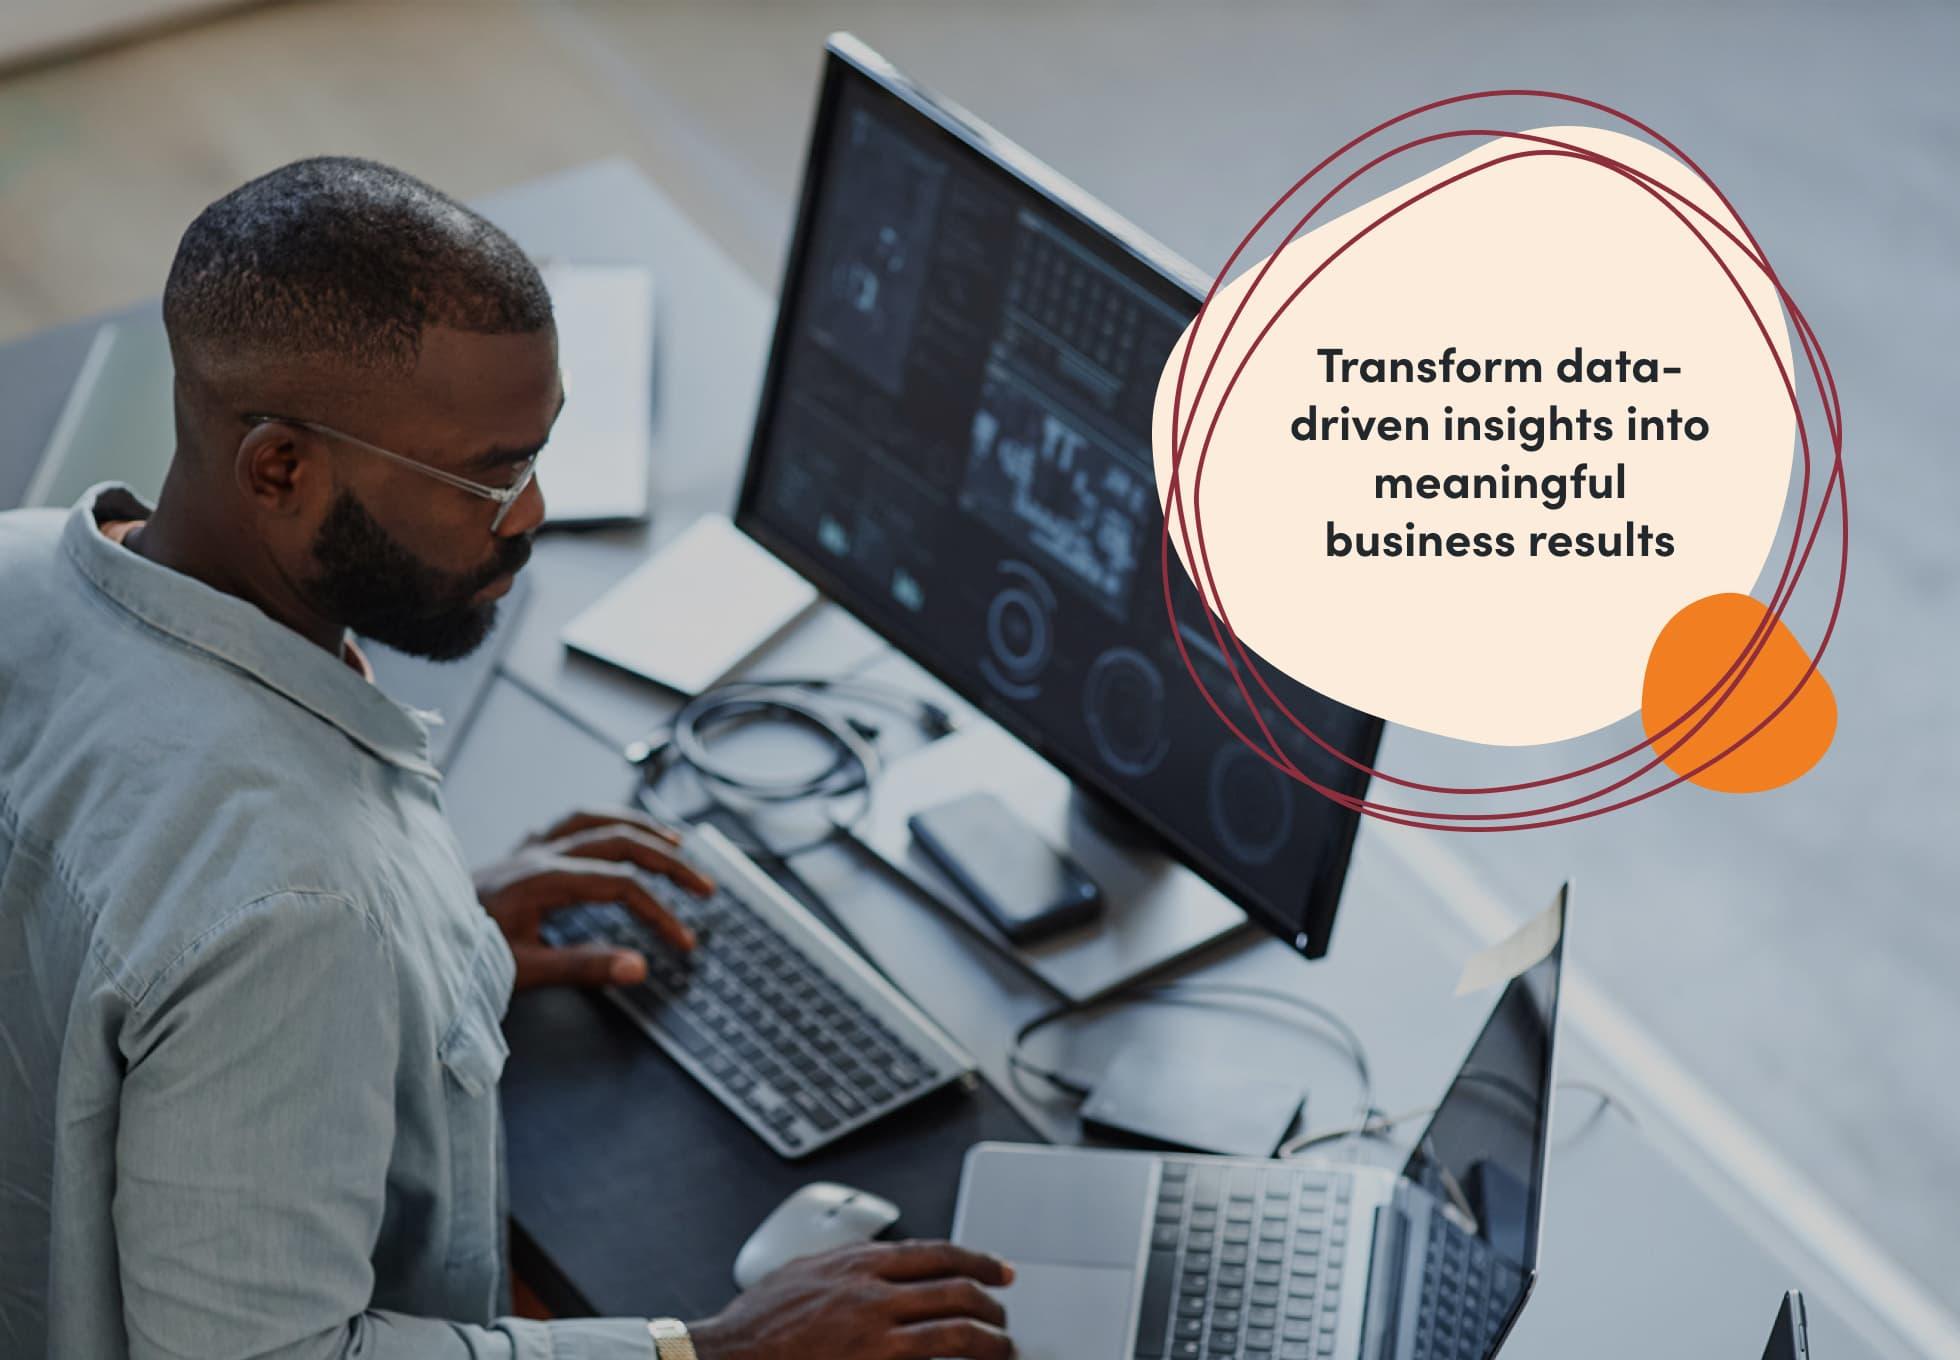 A person working at their desk, looking at a laptop next to a monitor. Imposed overtop is a sentence that says, "Transform data-driven insights into meaningful business results."